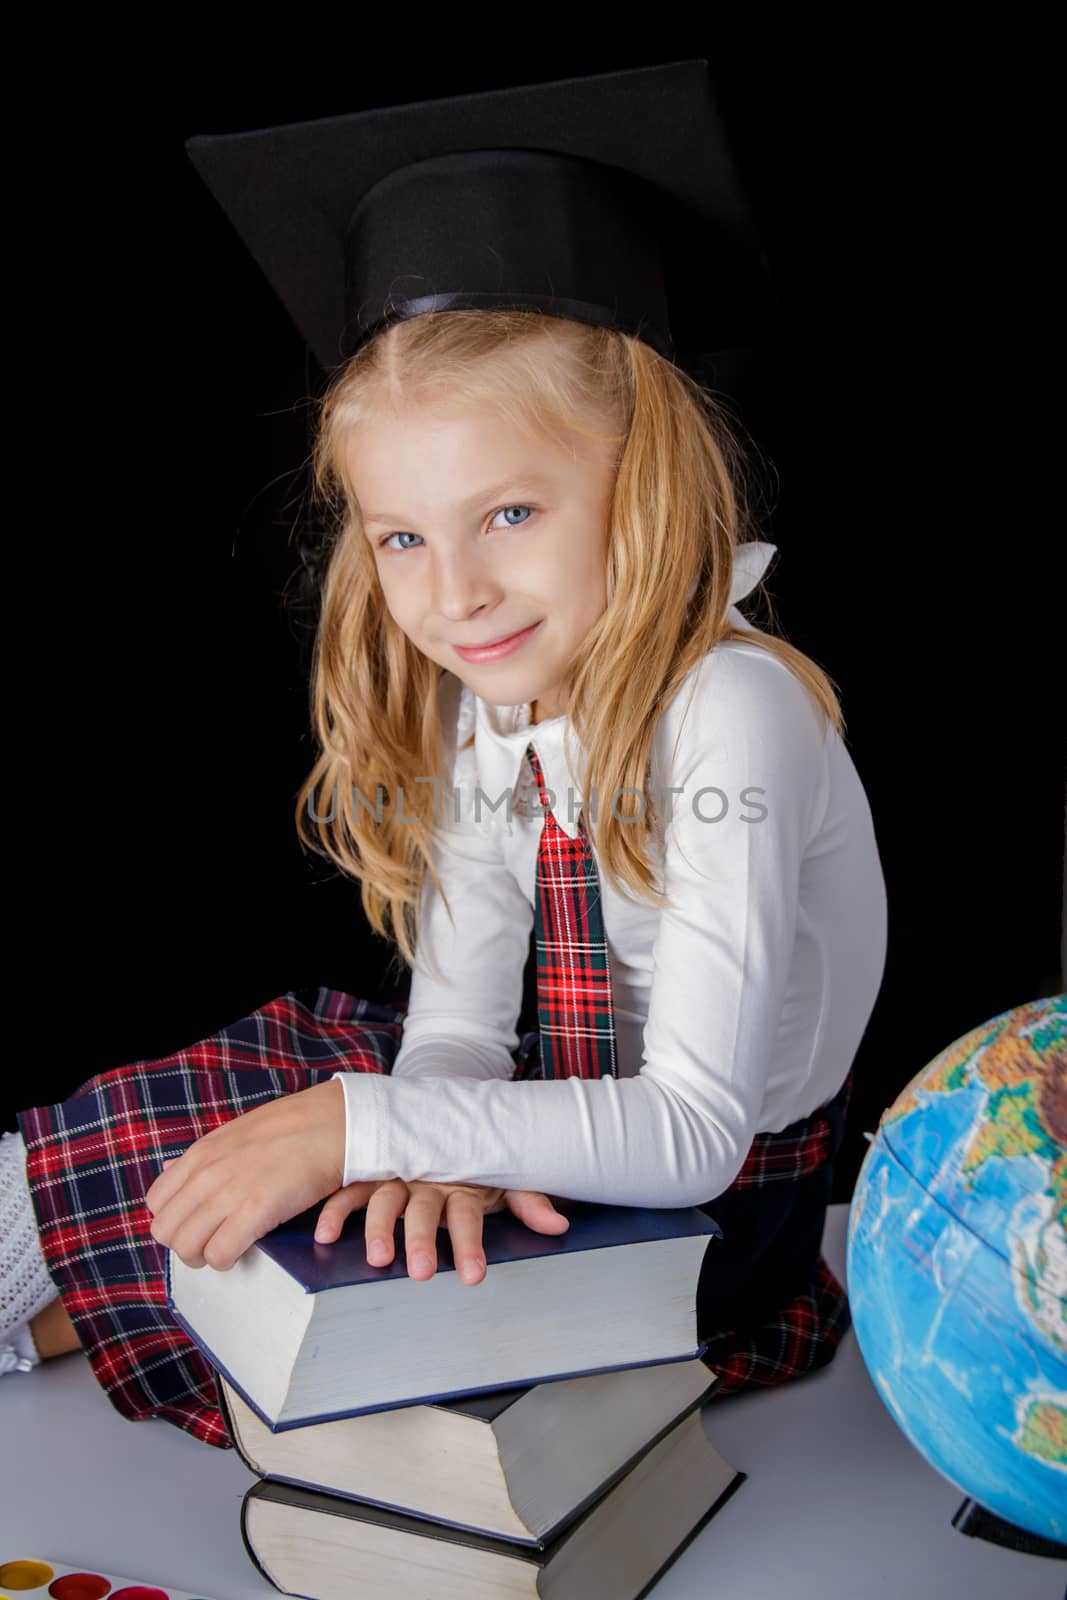 Schoolgirl with hat and globe sitting on black background by Angel_a